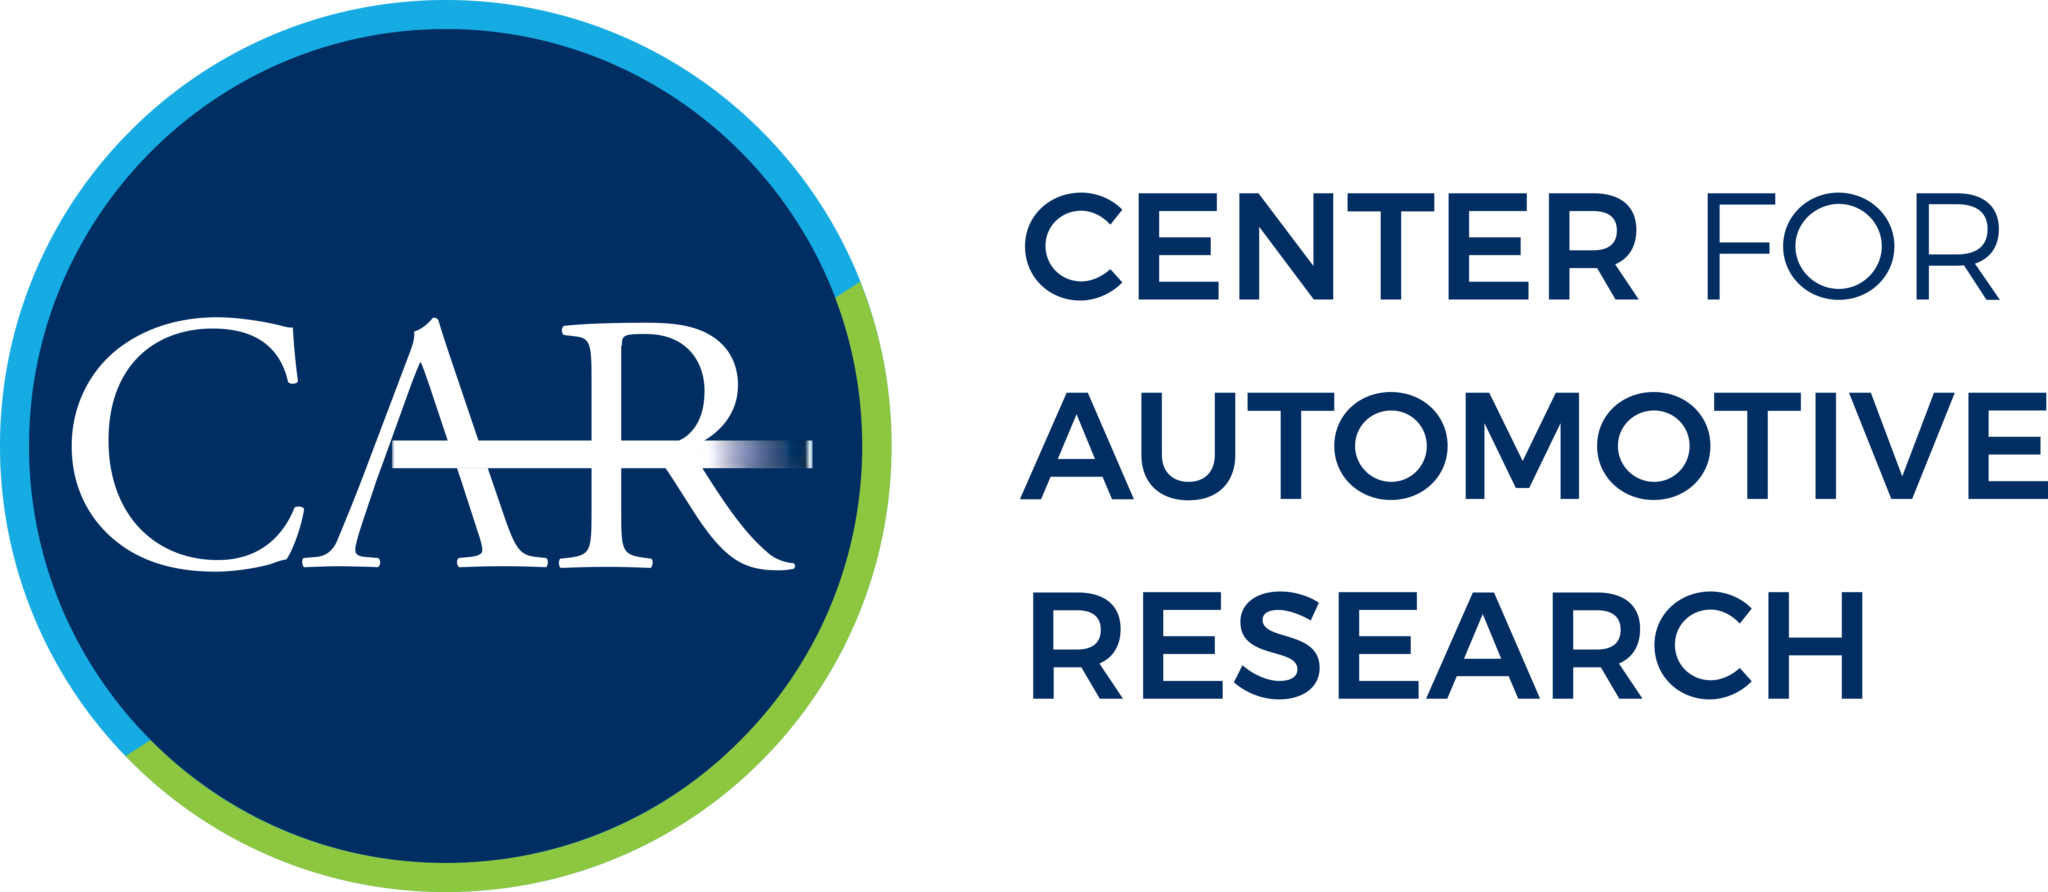 Center for Automotive Research Logos Download